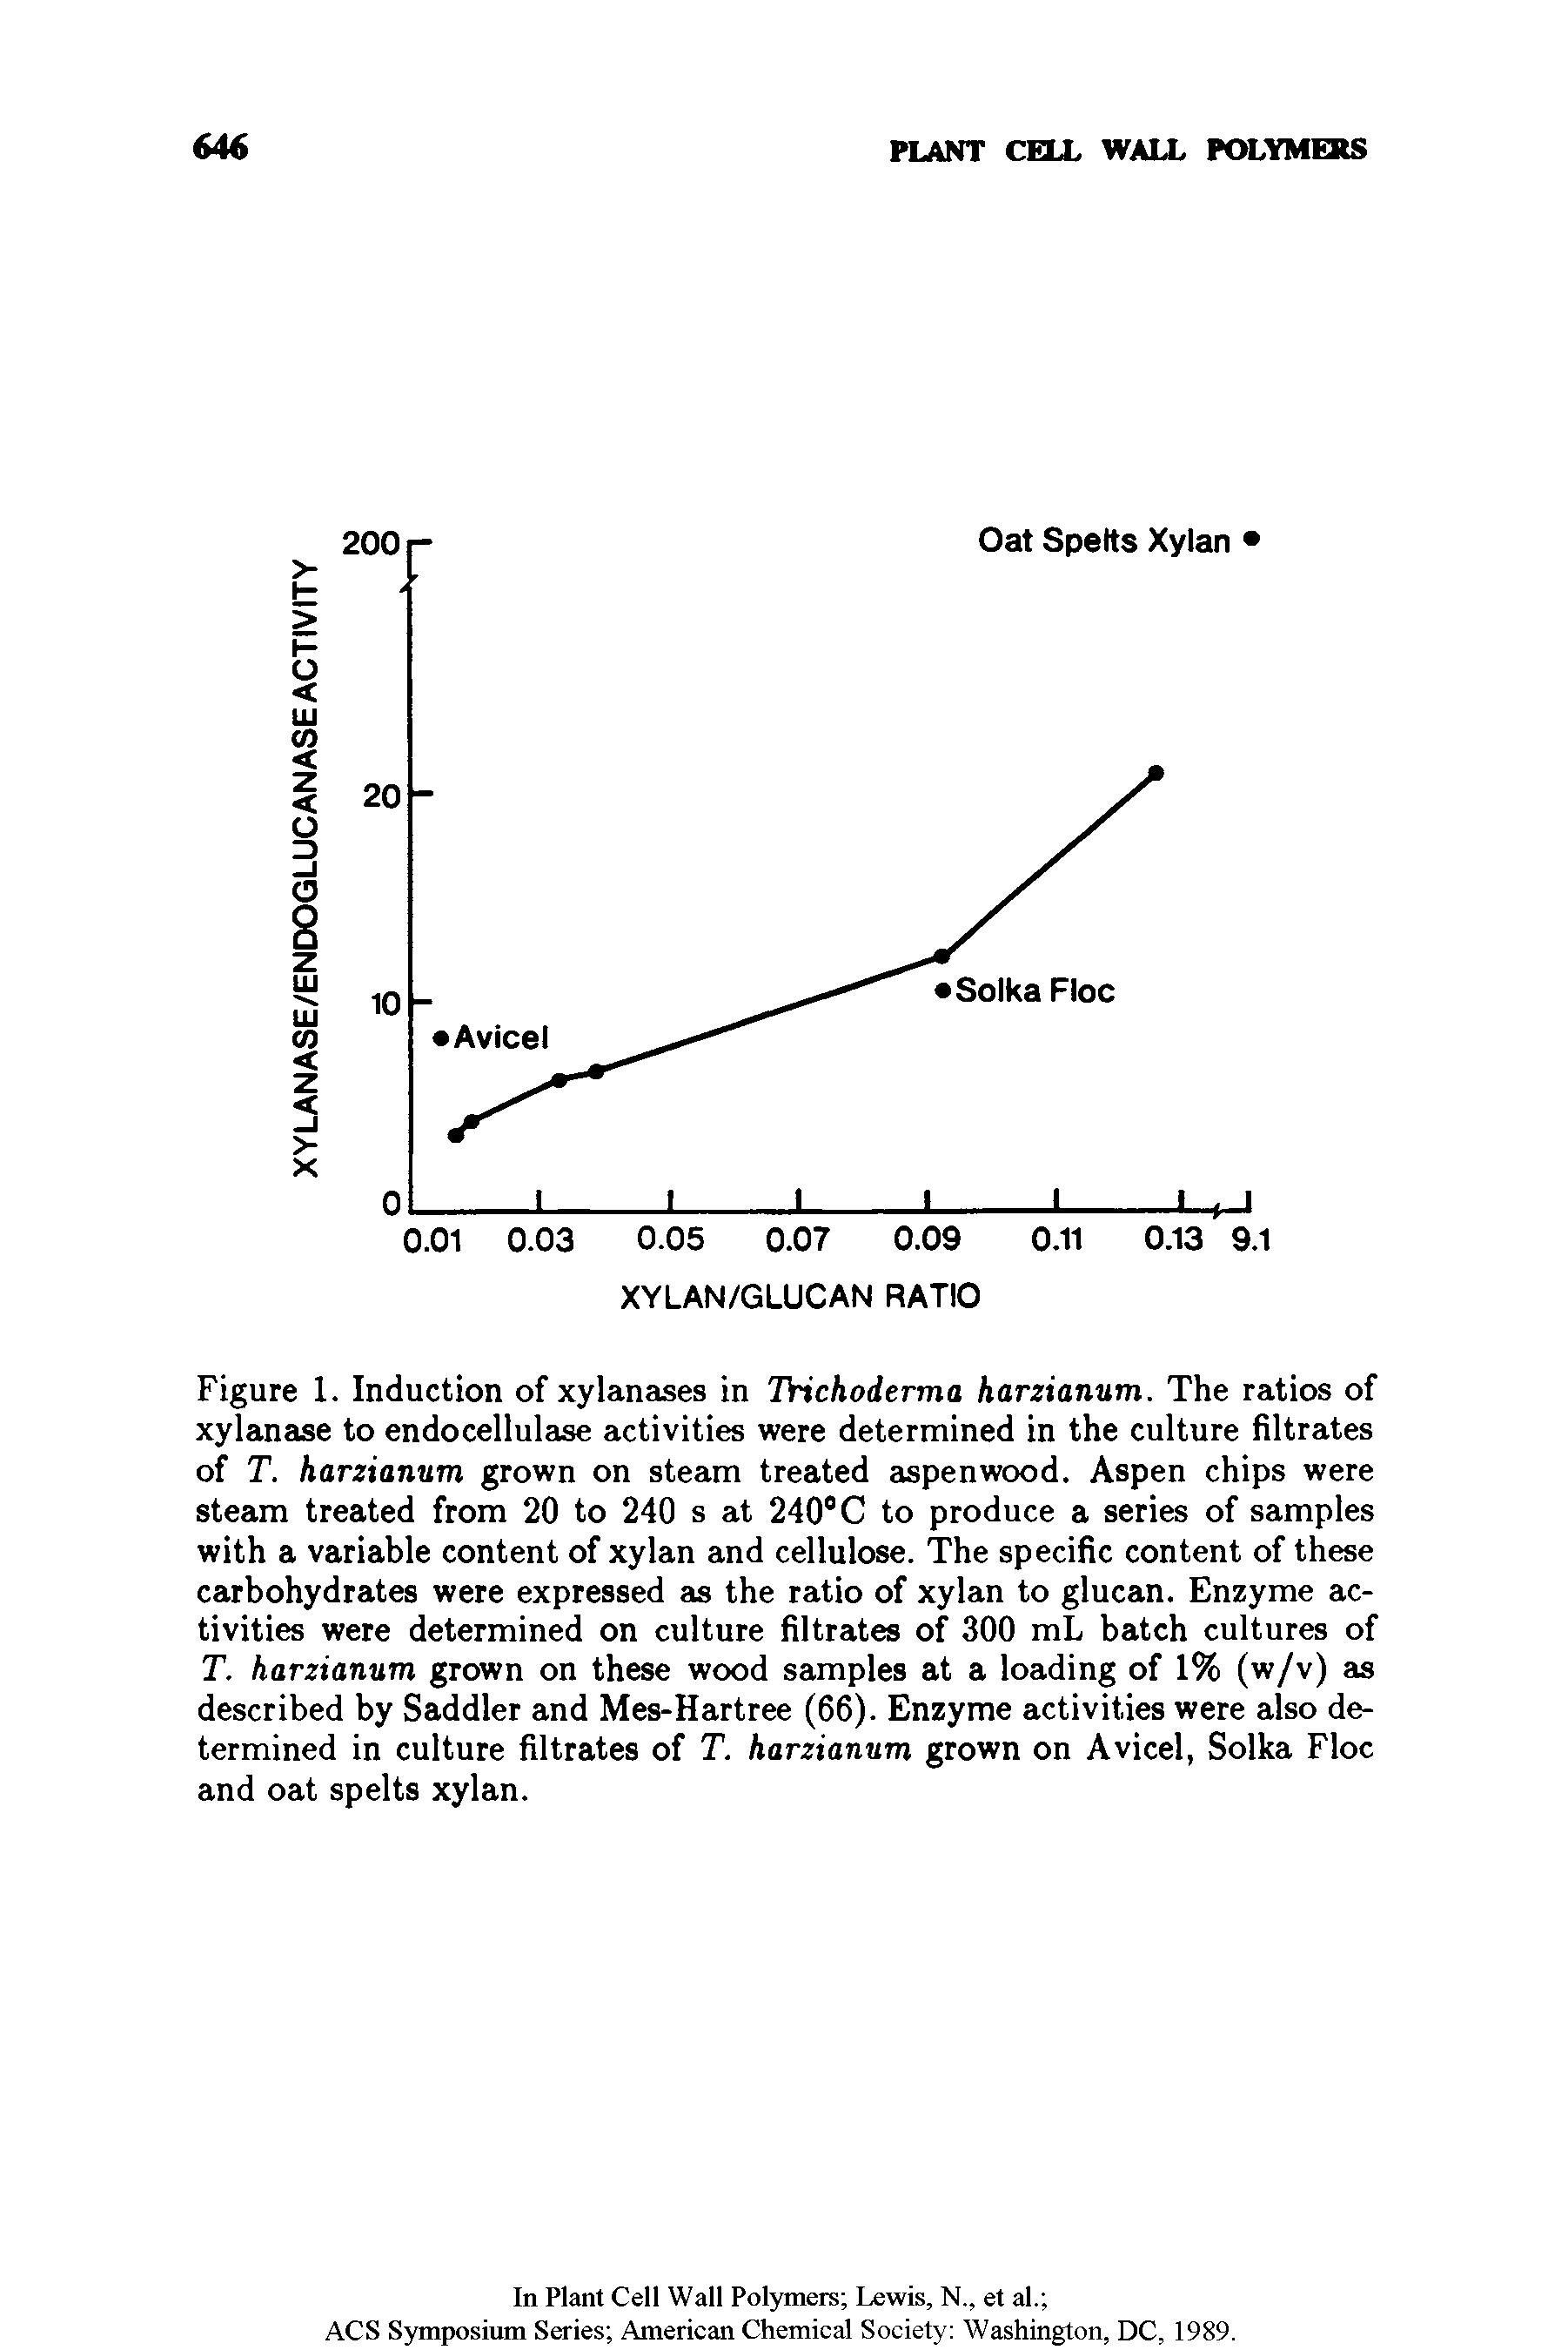 Figure 1. Induction of xylanases in Trichoderma harzianum. The ratios of xylanase to endocellulase activities were determined in the culture filtrates of T. harzianum grown on steam treated aspenwood. Aspen chips were steam treated from 20 to 240 s at 240° C to produce a series of samples with a variable content of xylan and cellulose. The specific content of these carbohydrates were expressed as the ratio of xylan to glucan. Enzyme activities were determined on culture filtrates of 300 mL batch cultures of T. harzianum grown on these wood samples at a loading of 1% (w/v) as described by Saddler and Mes-Hartree (66). Enzyme activities were also determined in culture filtrates of T. harzianum grown on Avicel, Solka Floe and oat spelts xylan.